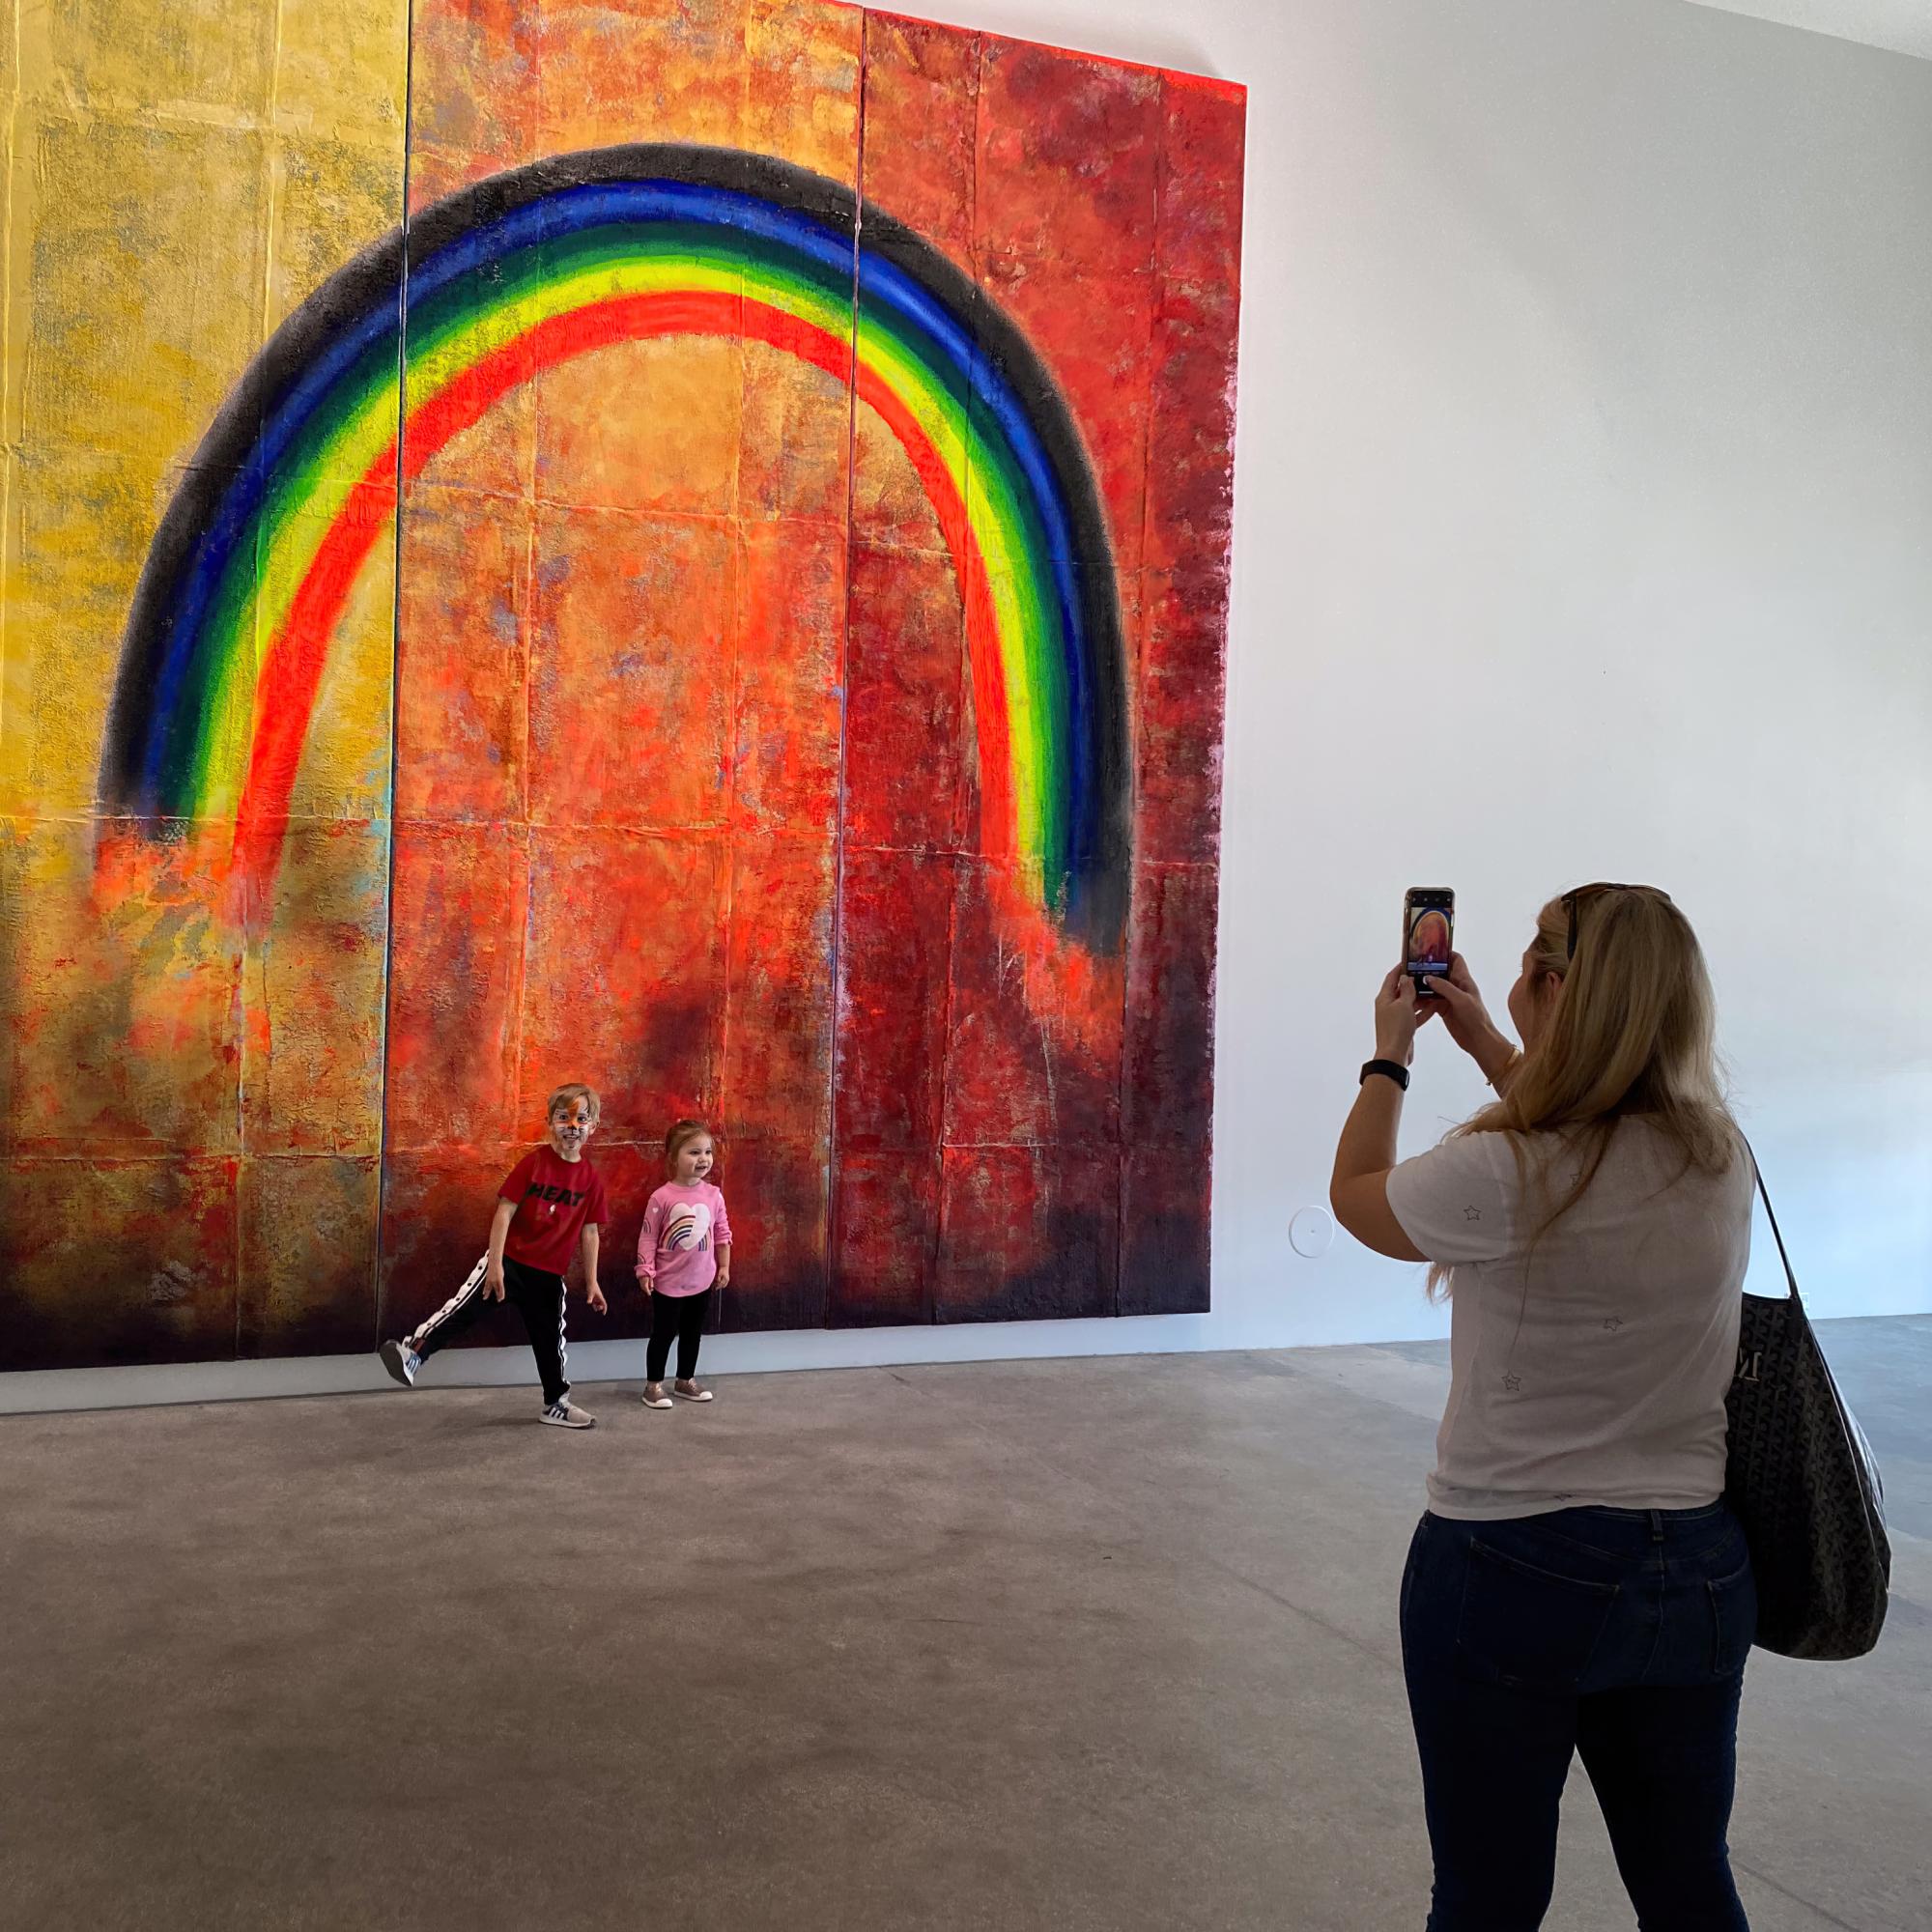 Viewing Art - Vaughn Spann's Rainbow at the Rubell Museum in Miami....